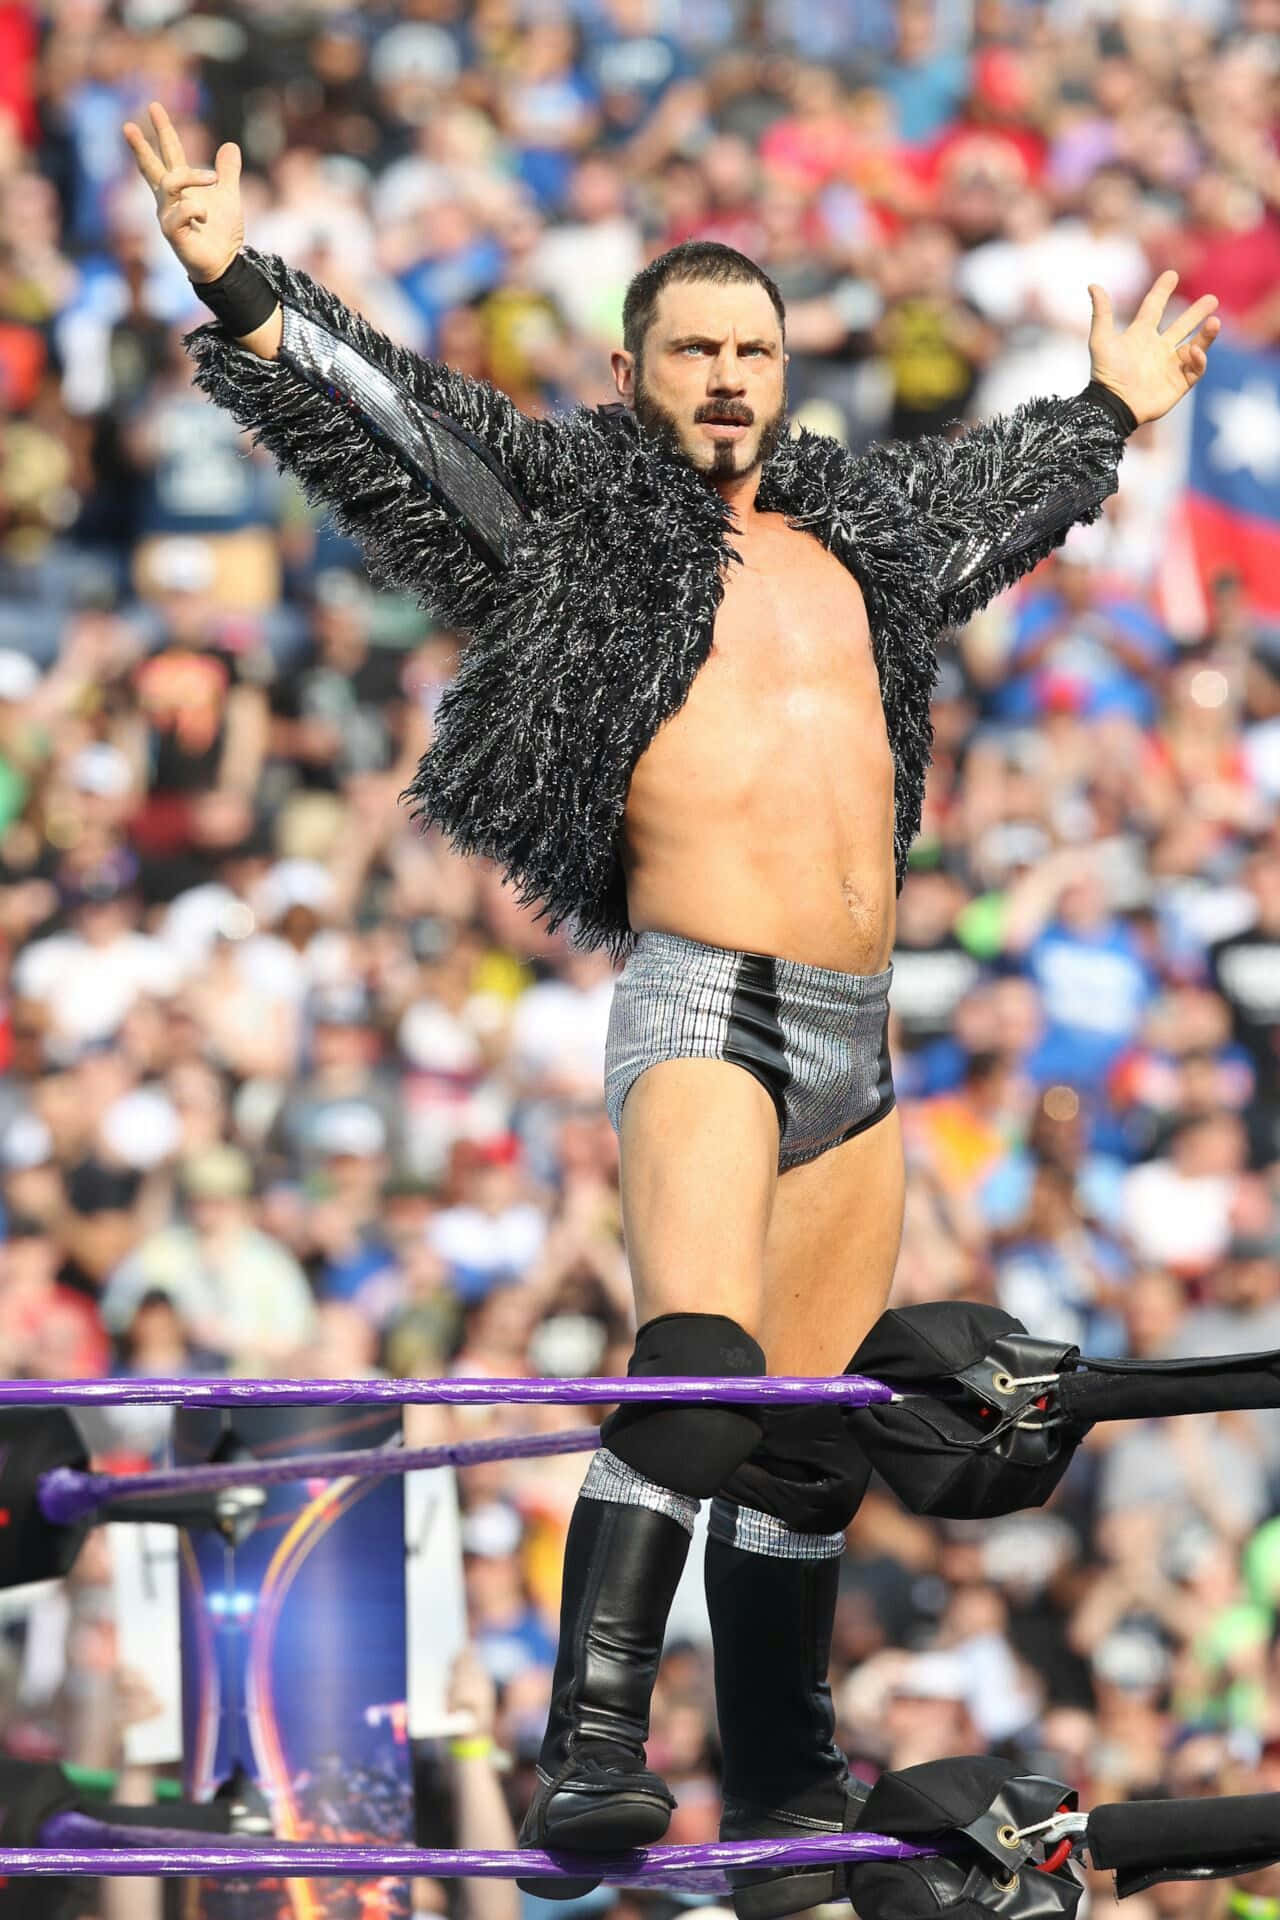 Austin Aries - a Pro Wrestling Legend in Action at WrestleMania 33. Wallpaper